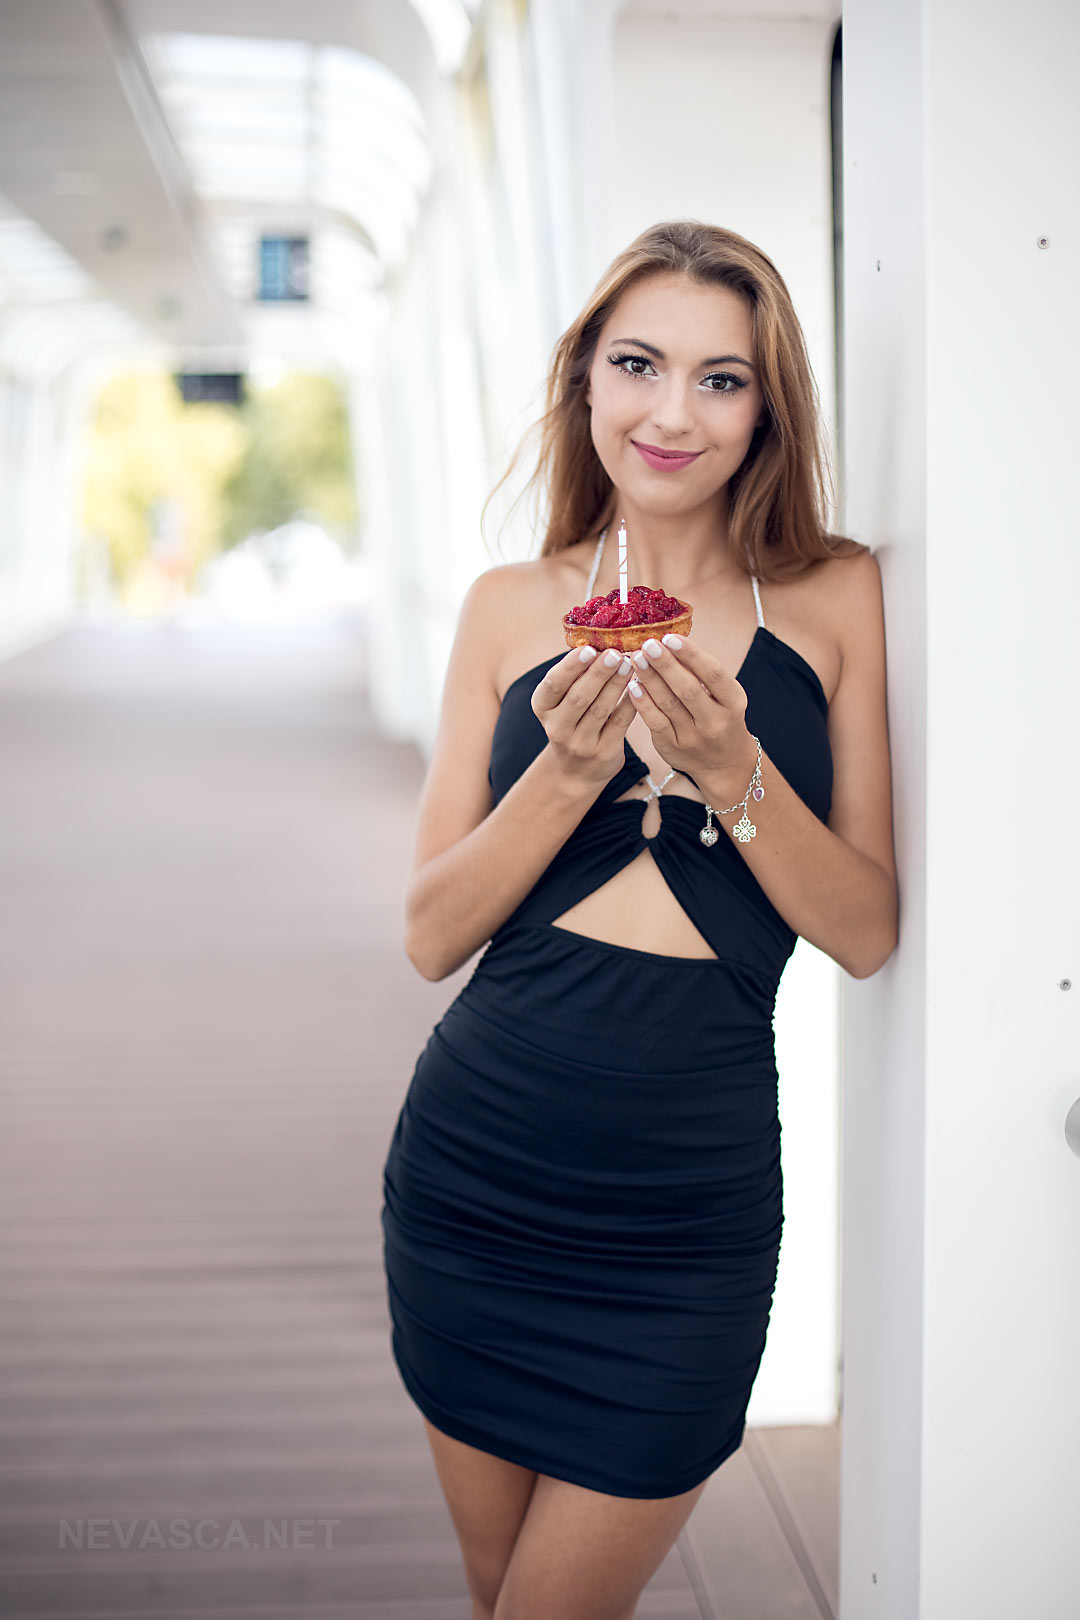 A young woman is holding in her hands a birthday cake.